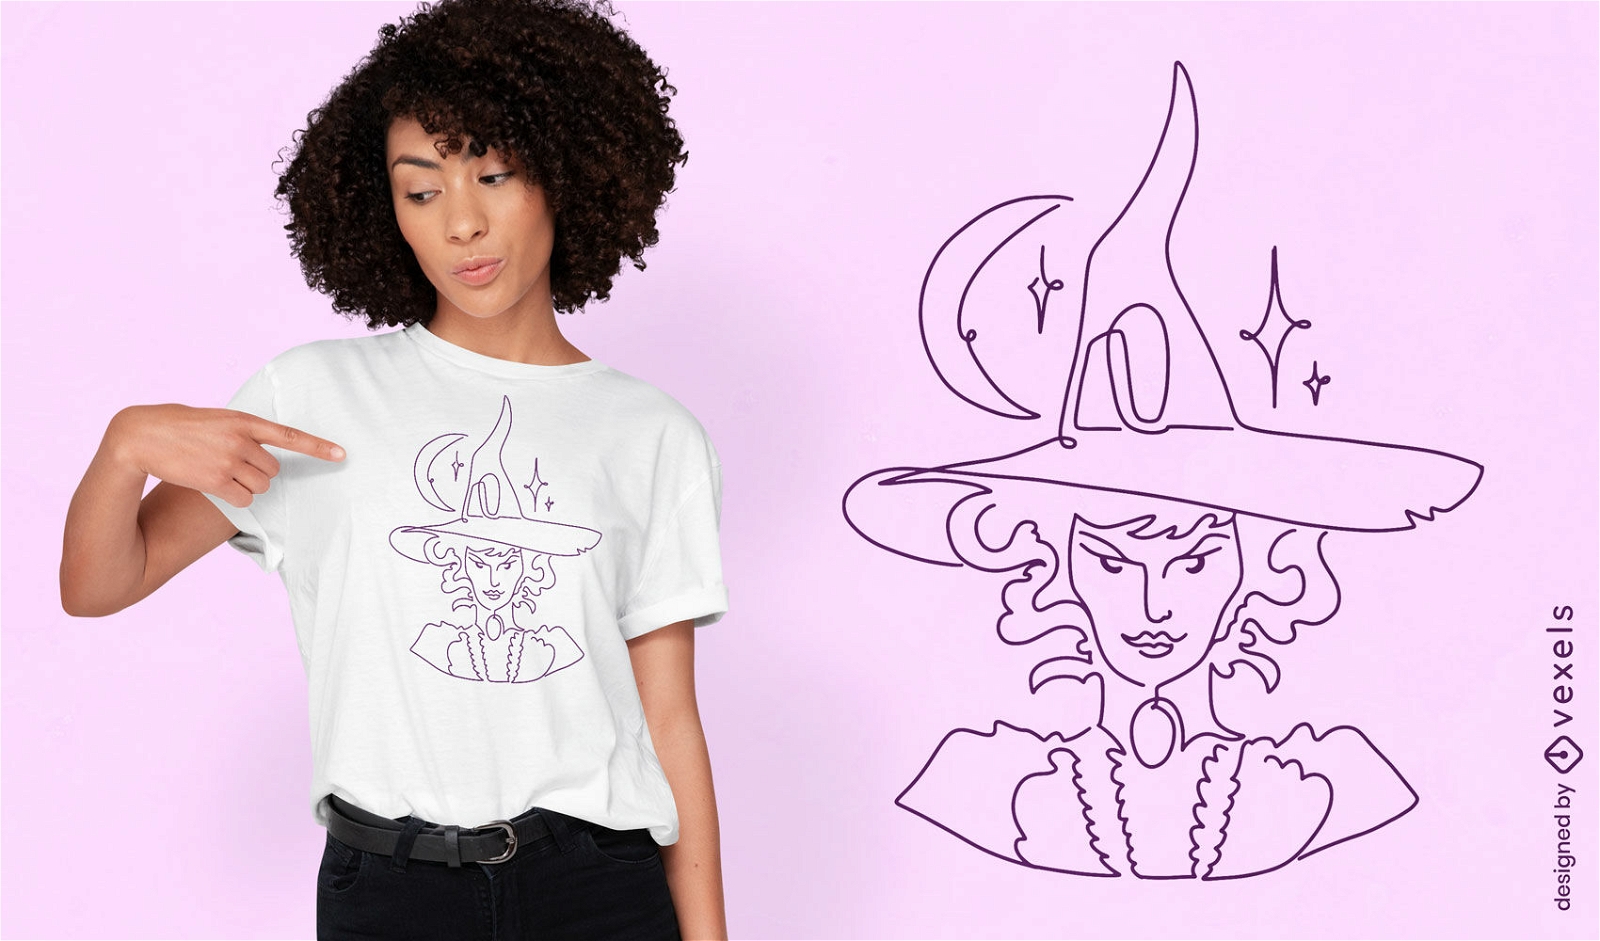 Witch fantasy character t-shirt design